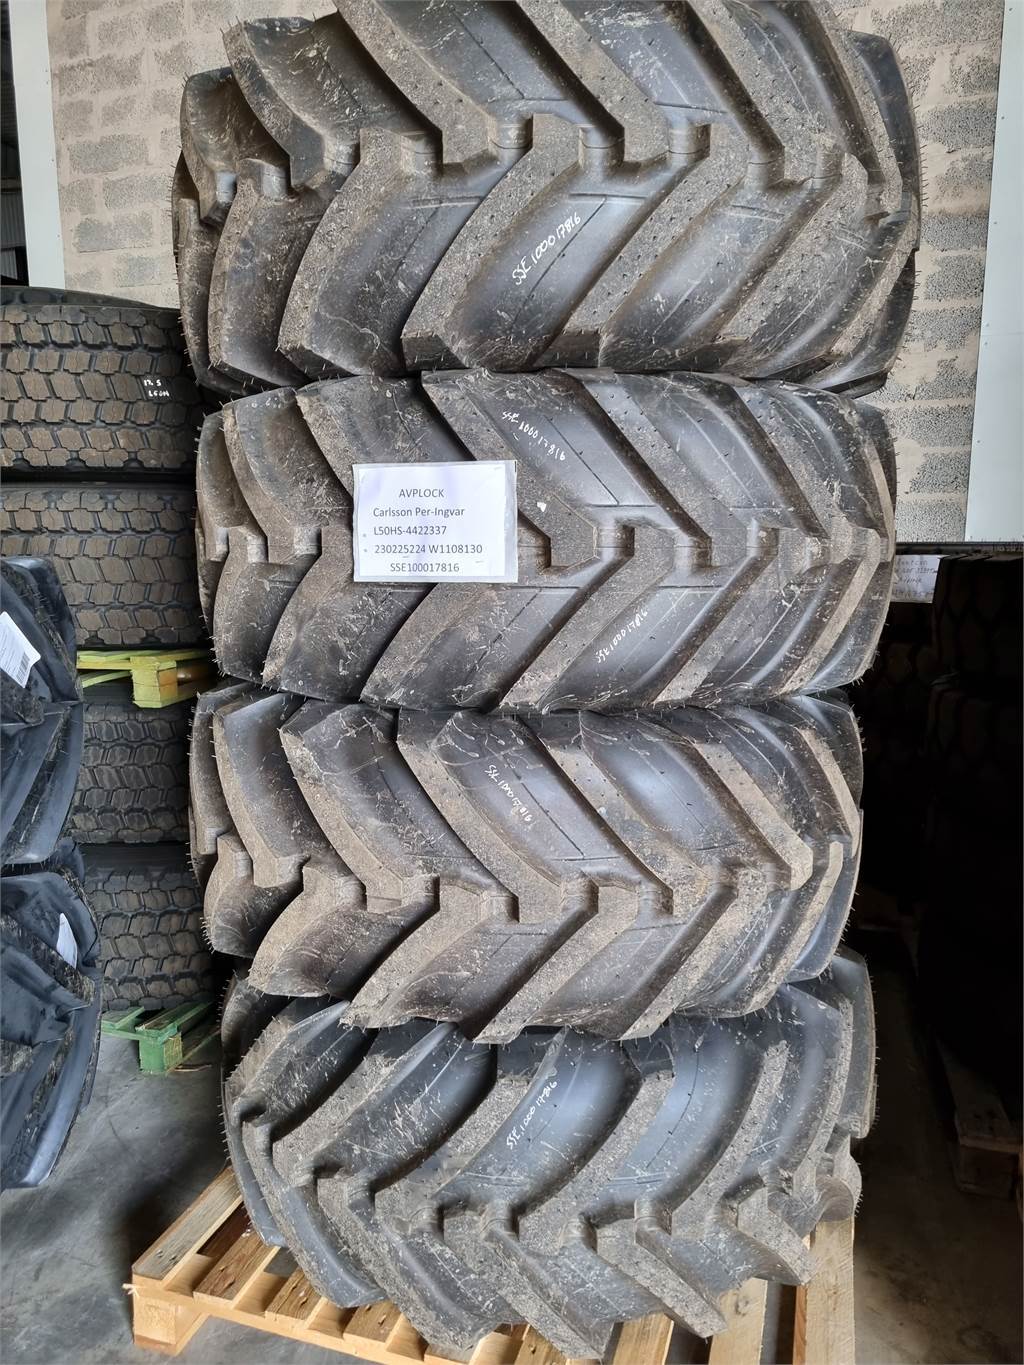 michelin-500-70-r2,vce-ud_sse10017816_1.jpg